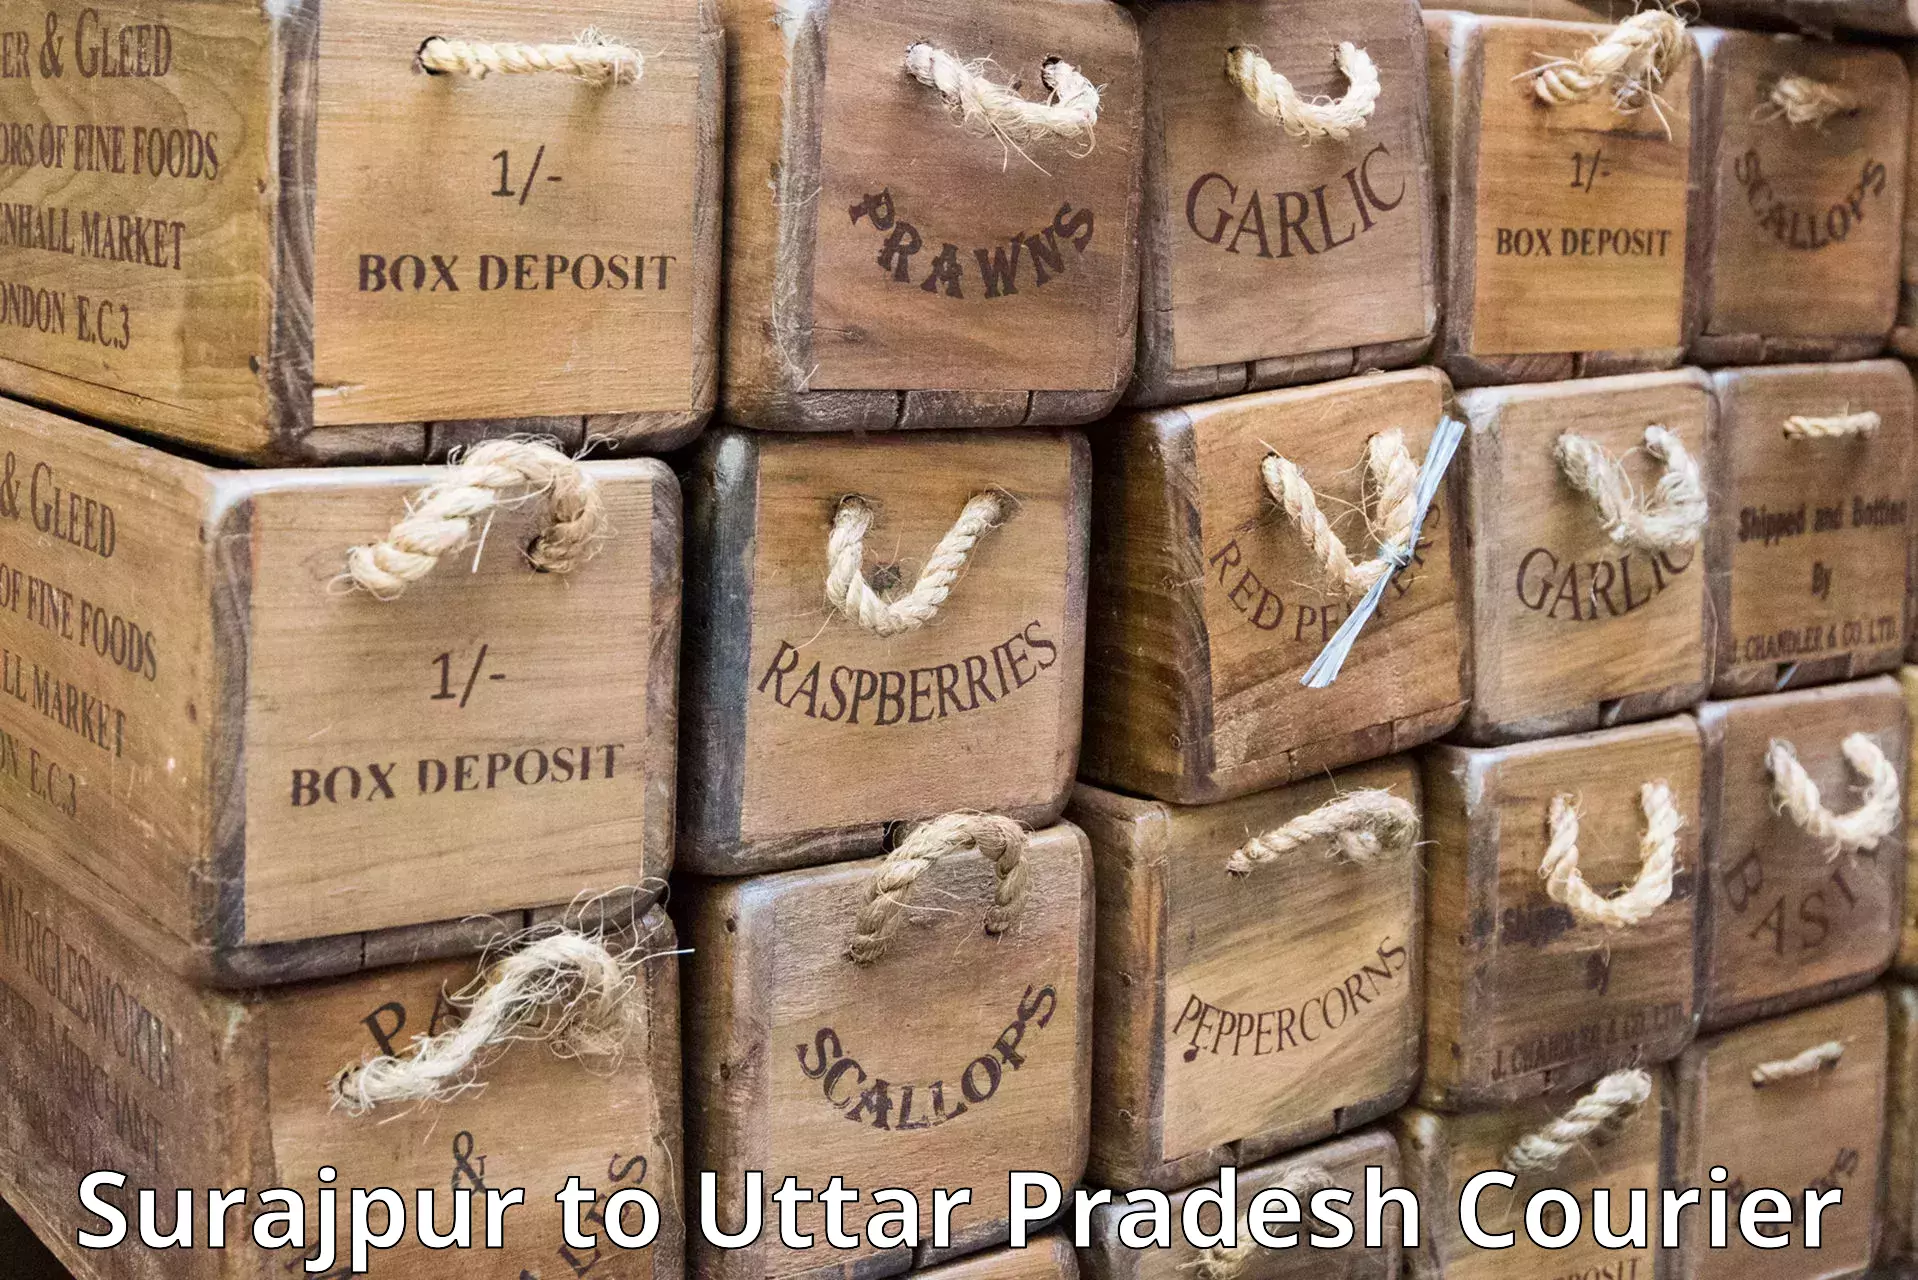 Quality courier partnerships Surajpur to Agra